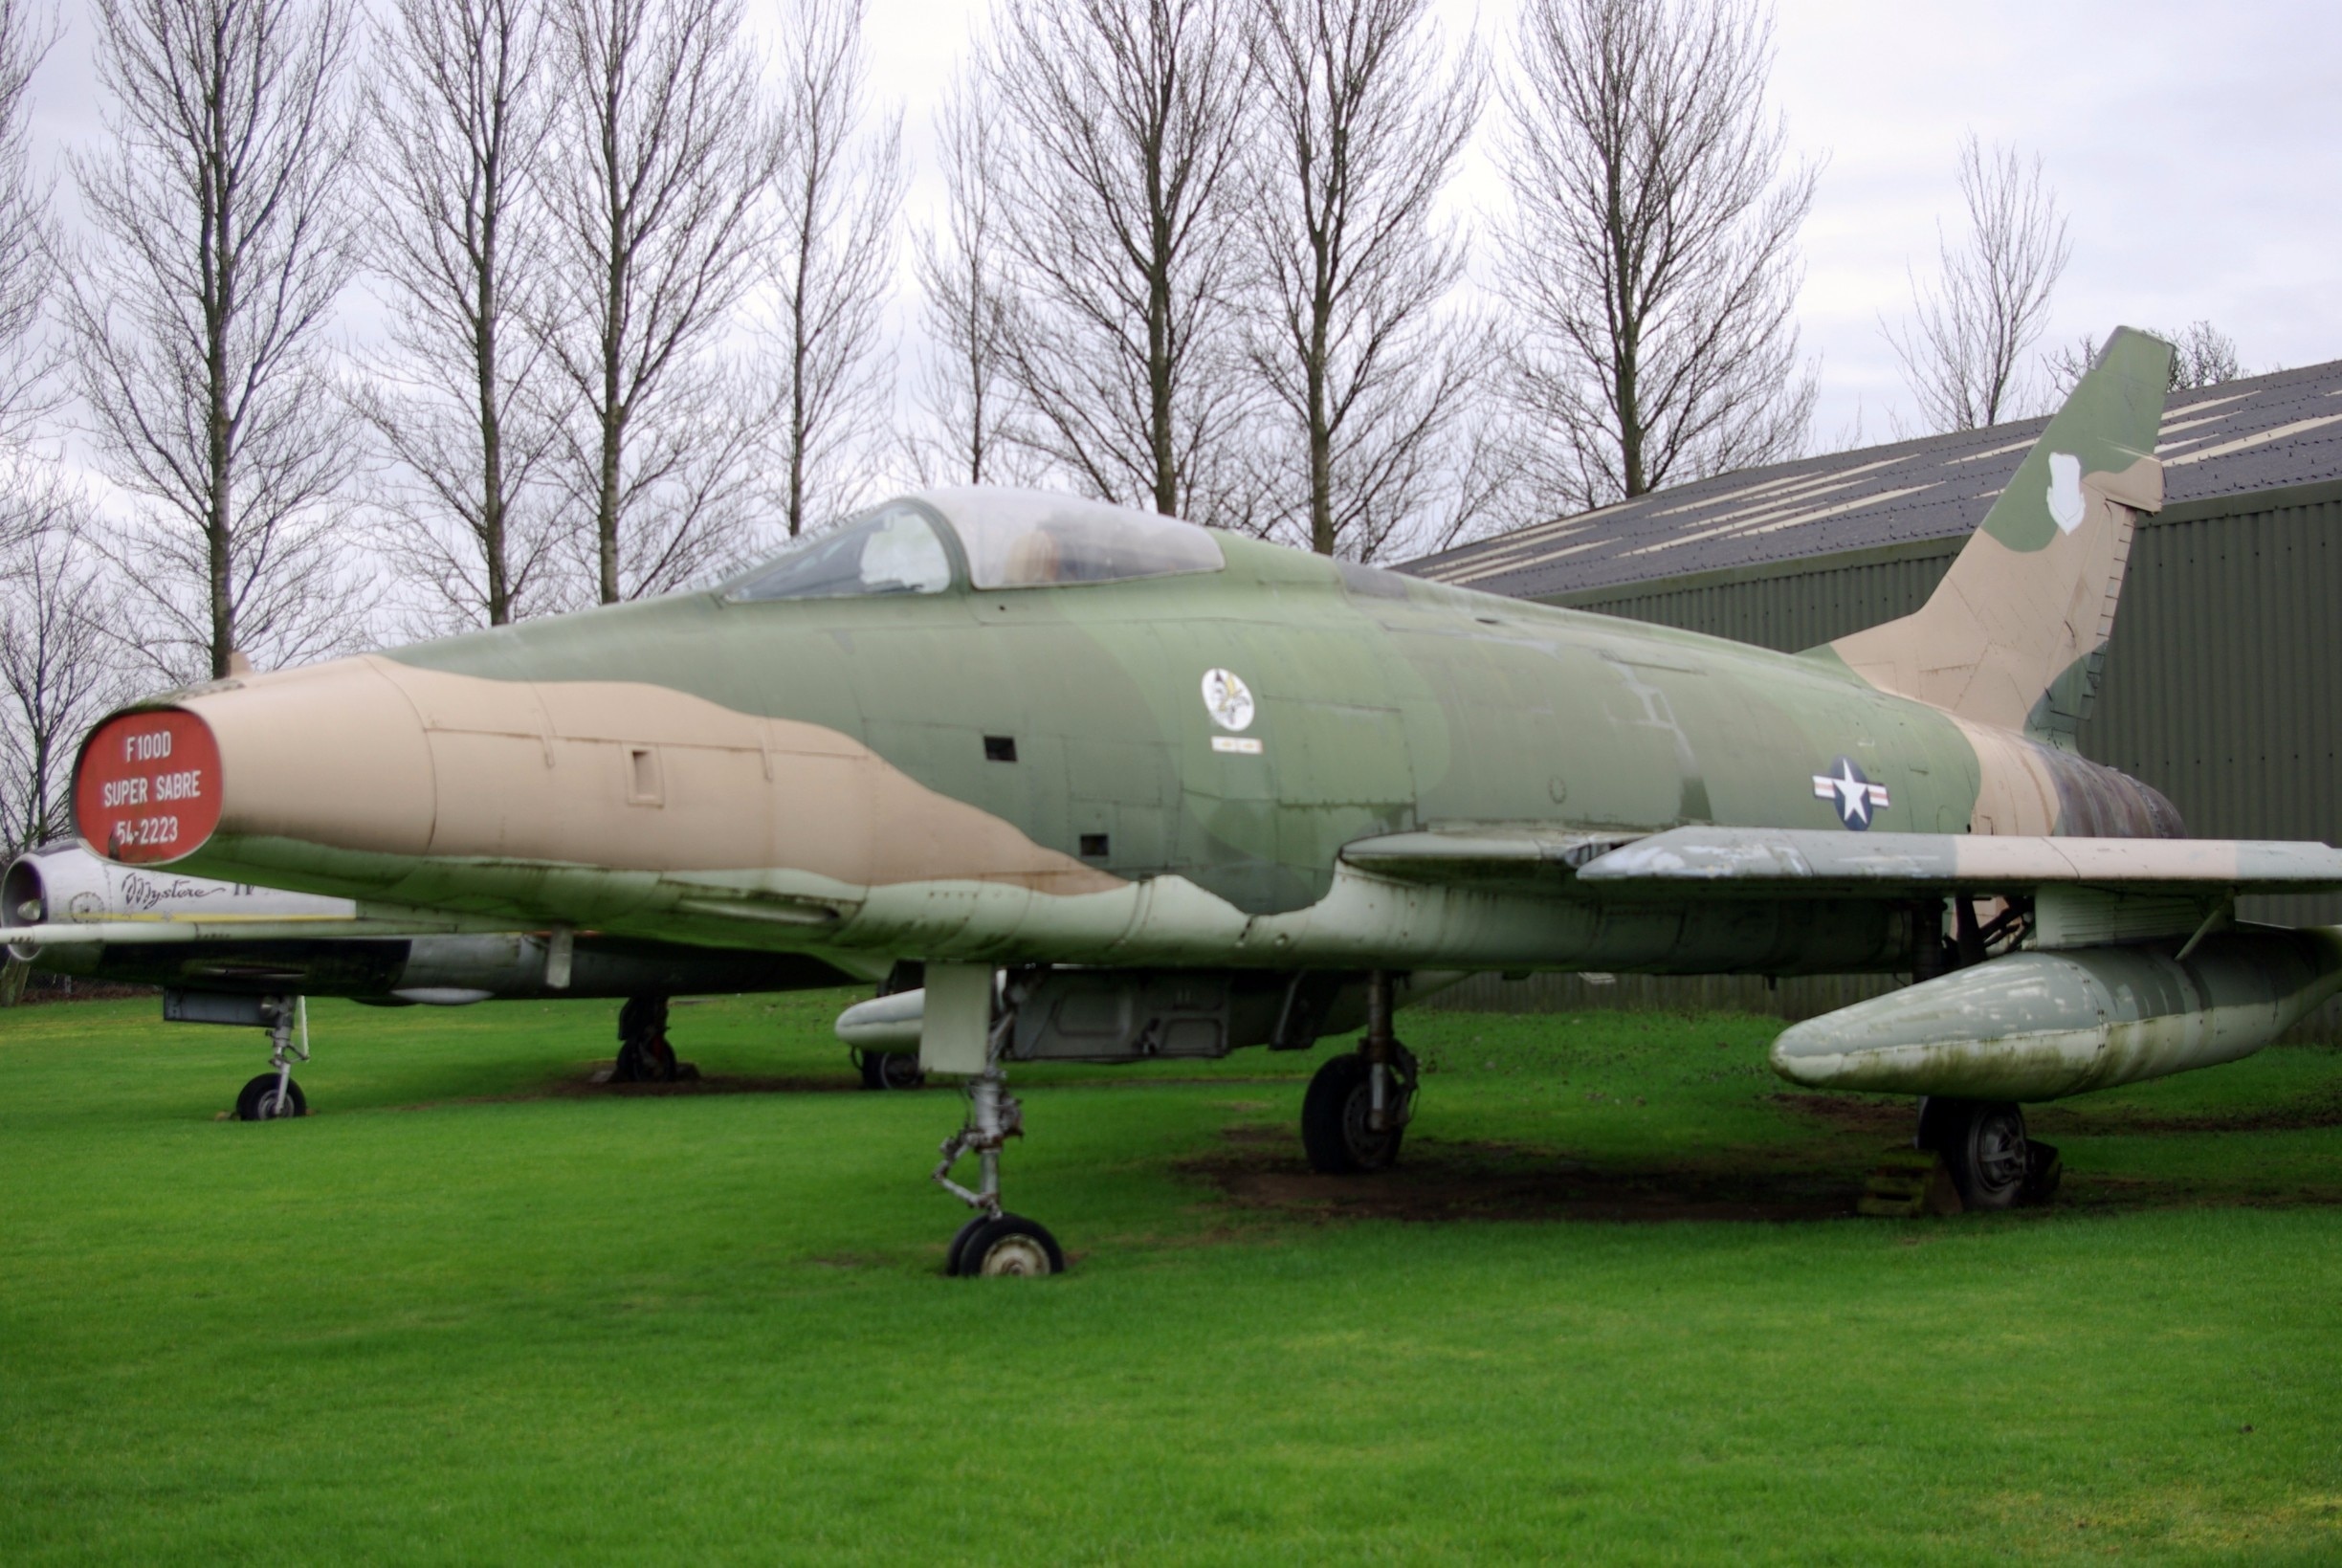 A nice UK aviation museum aircraft located in and outside 